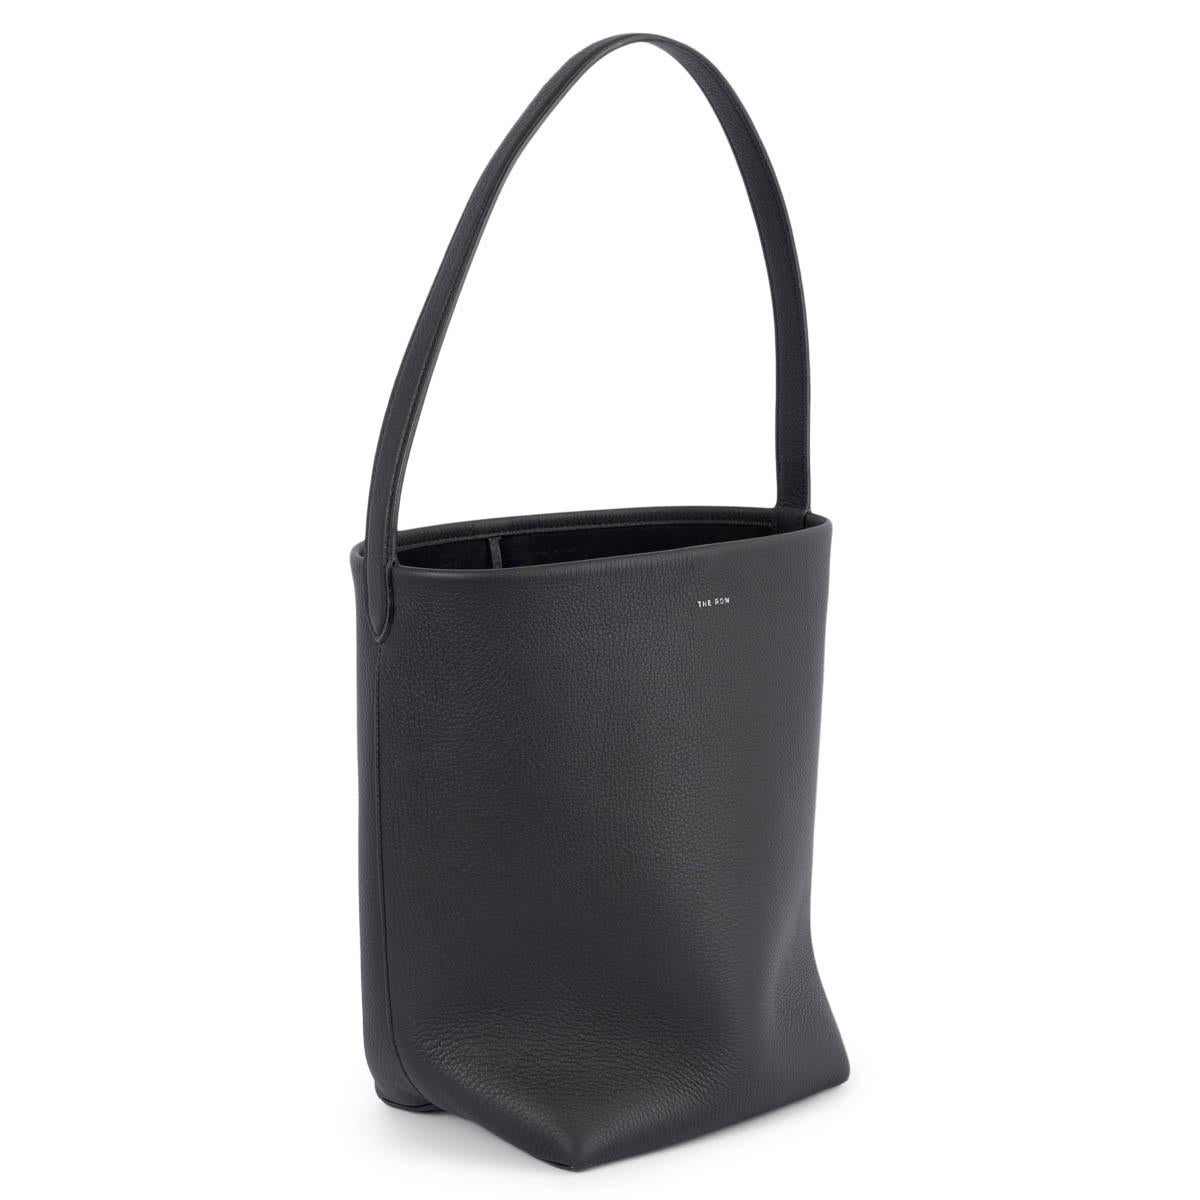 100% authentic The Row North South Park Medium tote bag in black pebbled calfskin. The design features label branding at front, a slim top handle, unlined with an open top.  Has been carried once and is in virtually new condition.